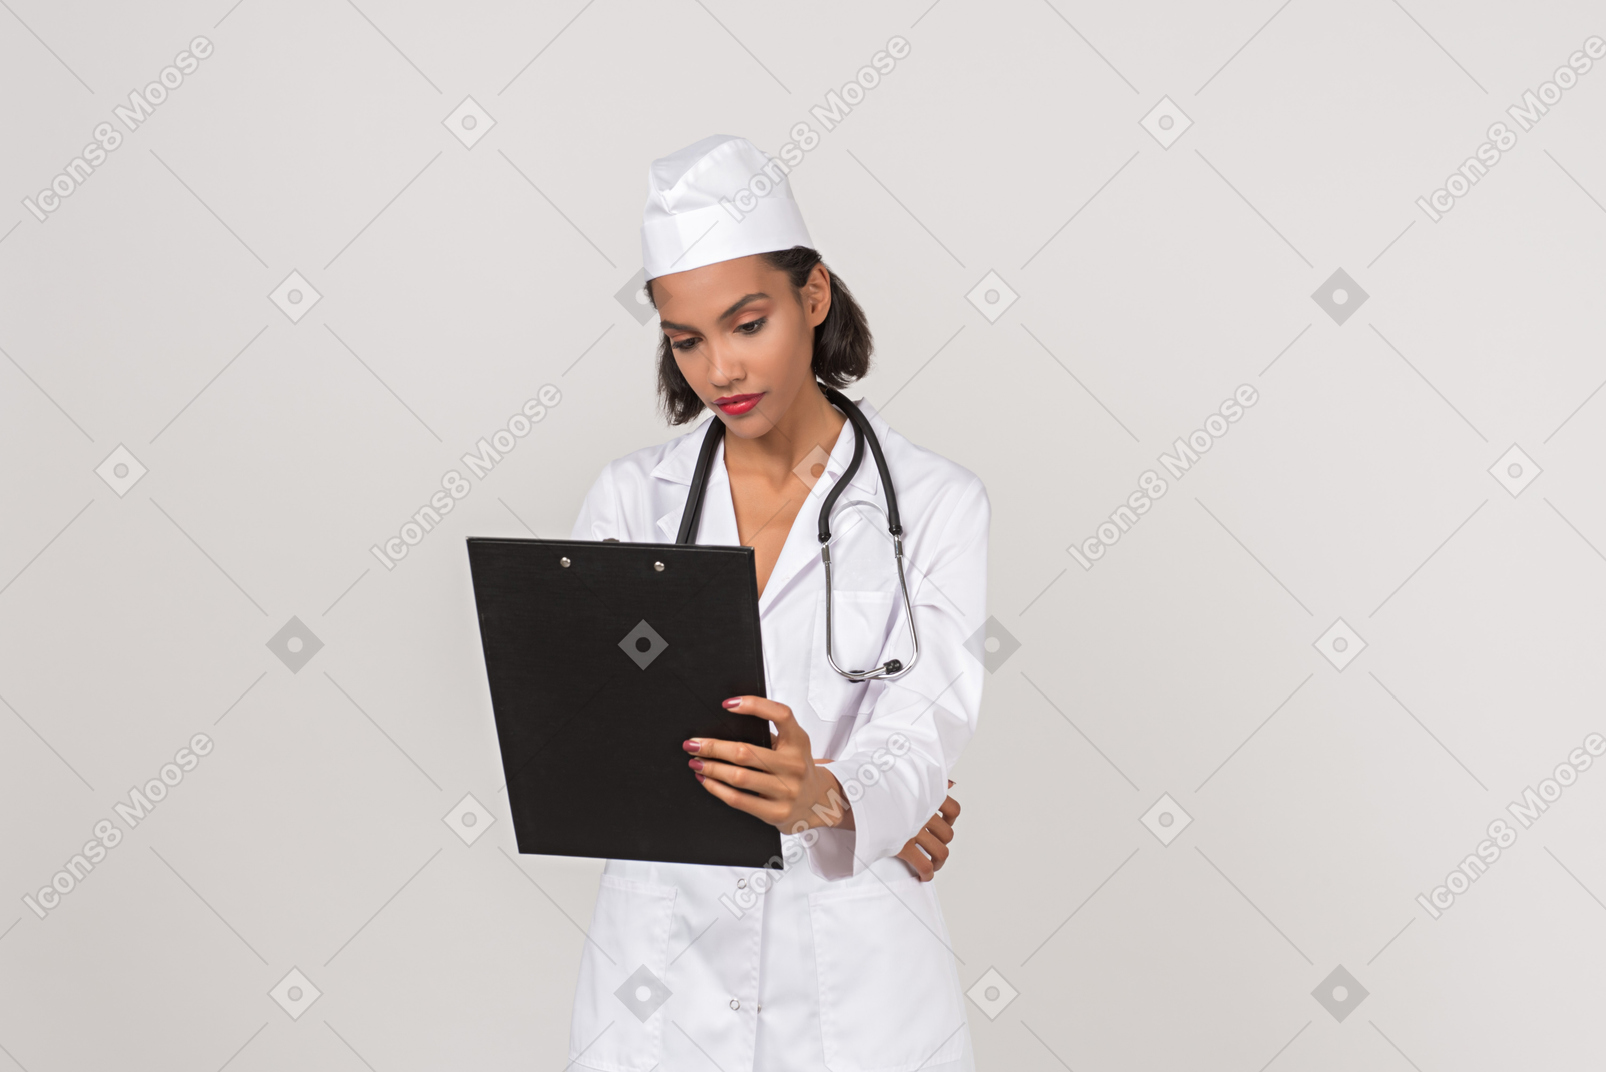 Attractive female doctor looking through some documents